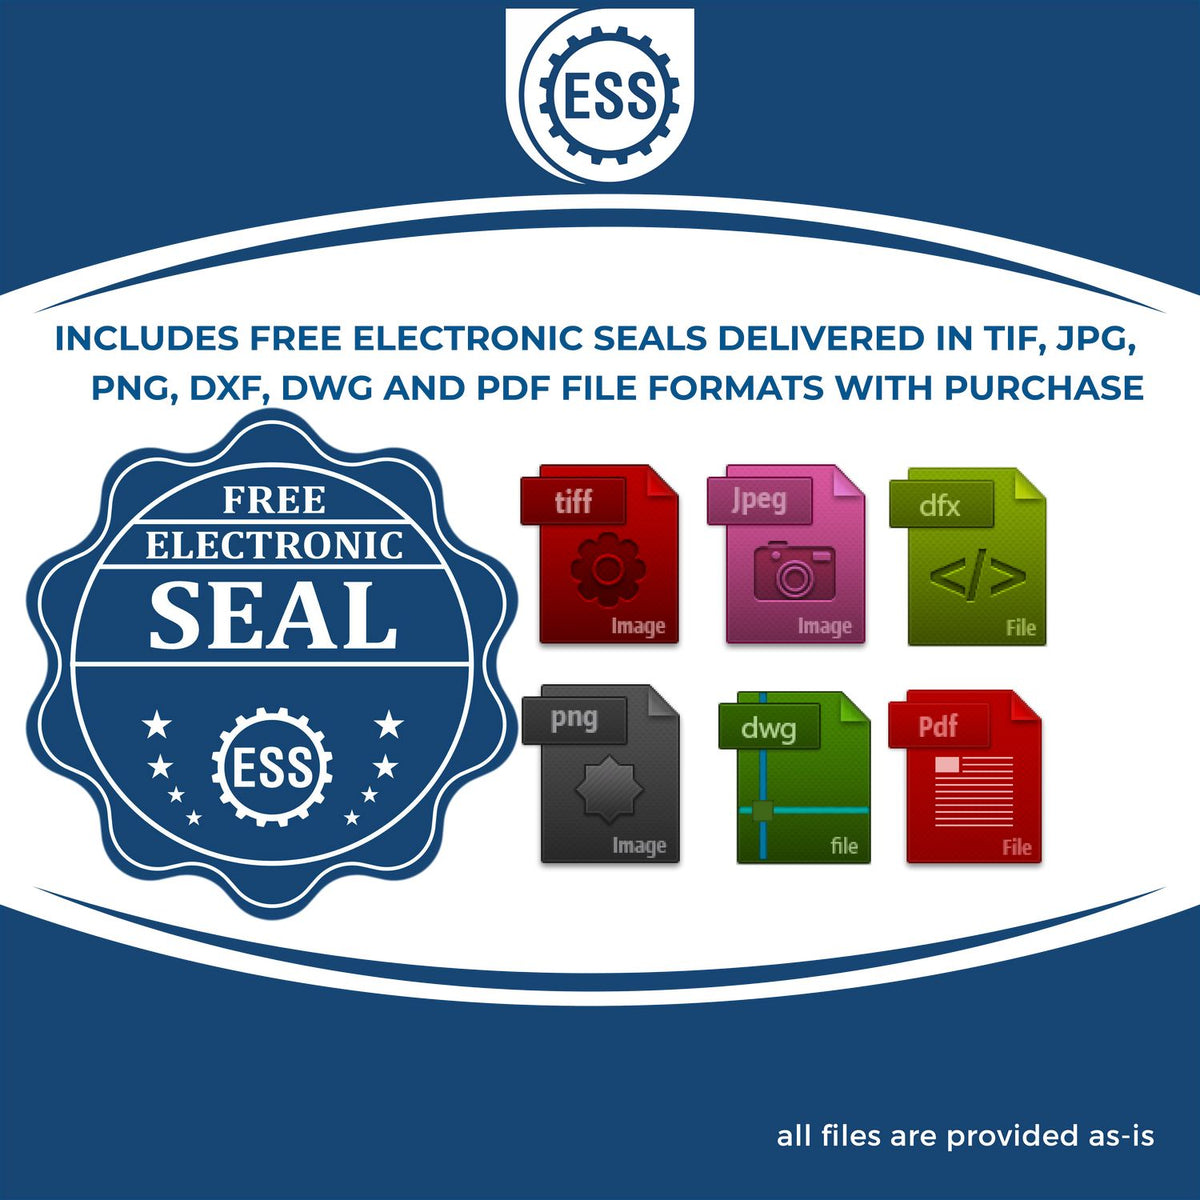 An infographic for the free electronic seal for the Premium MaxLight Pre-Inked New Mexico Geology Stamp illustrating the different file type icons such as DXF, DWG, TIF, JPG and PNG.